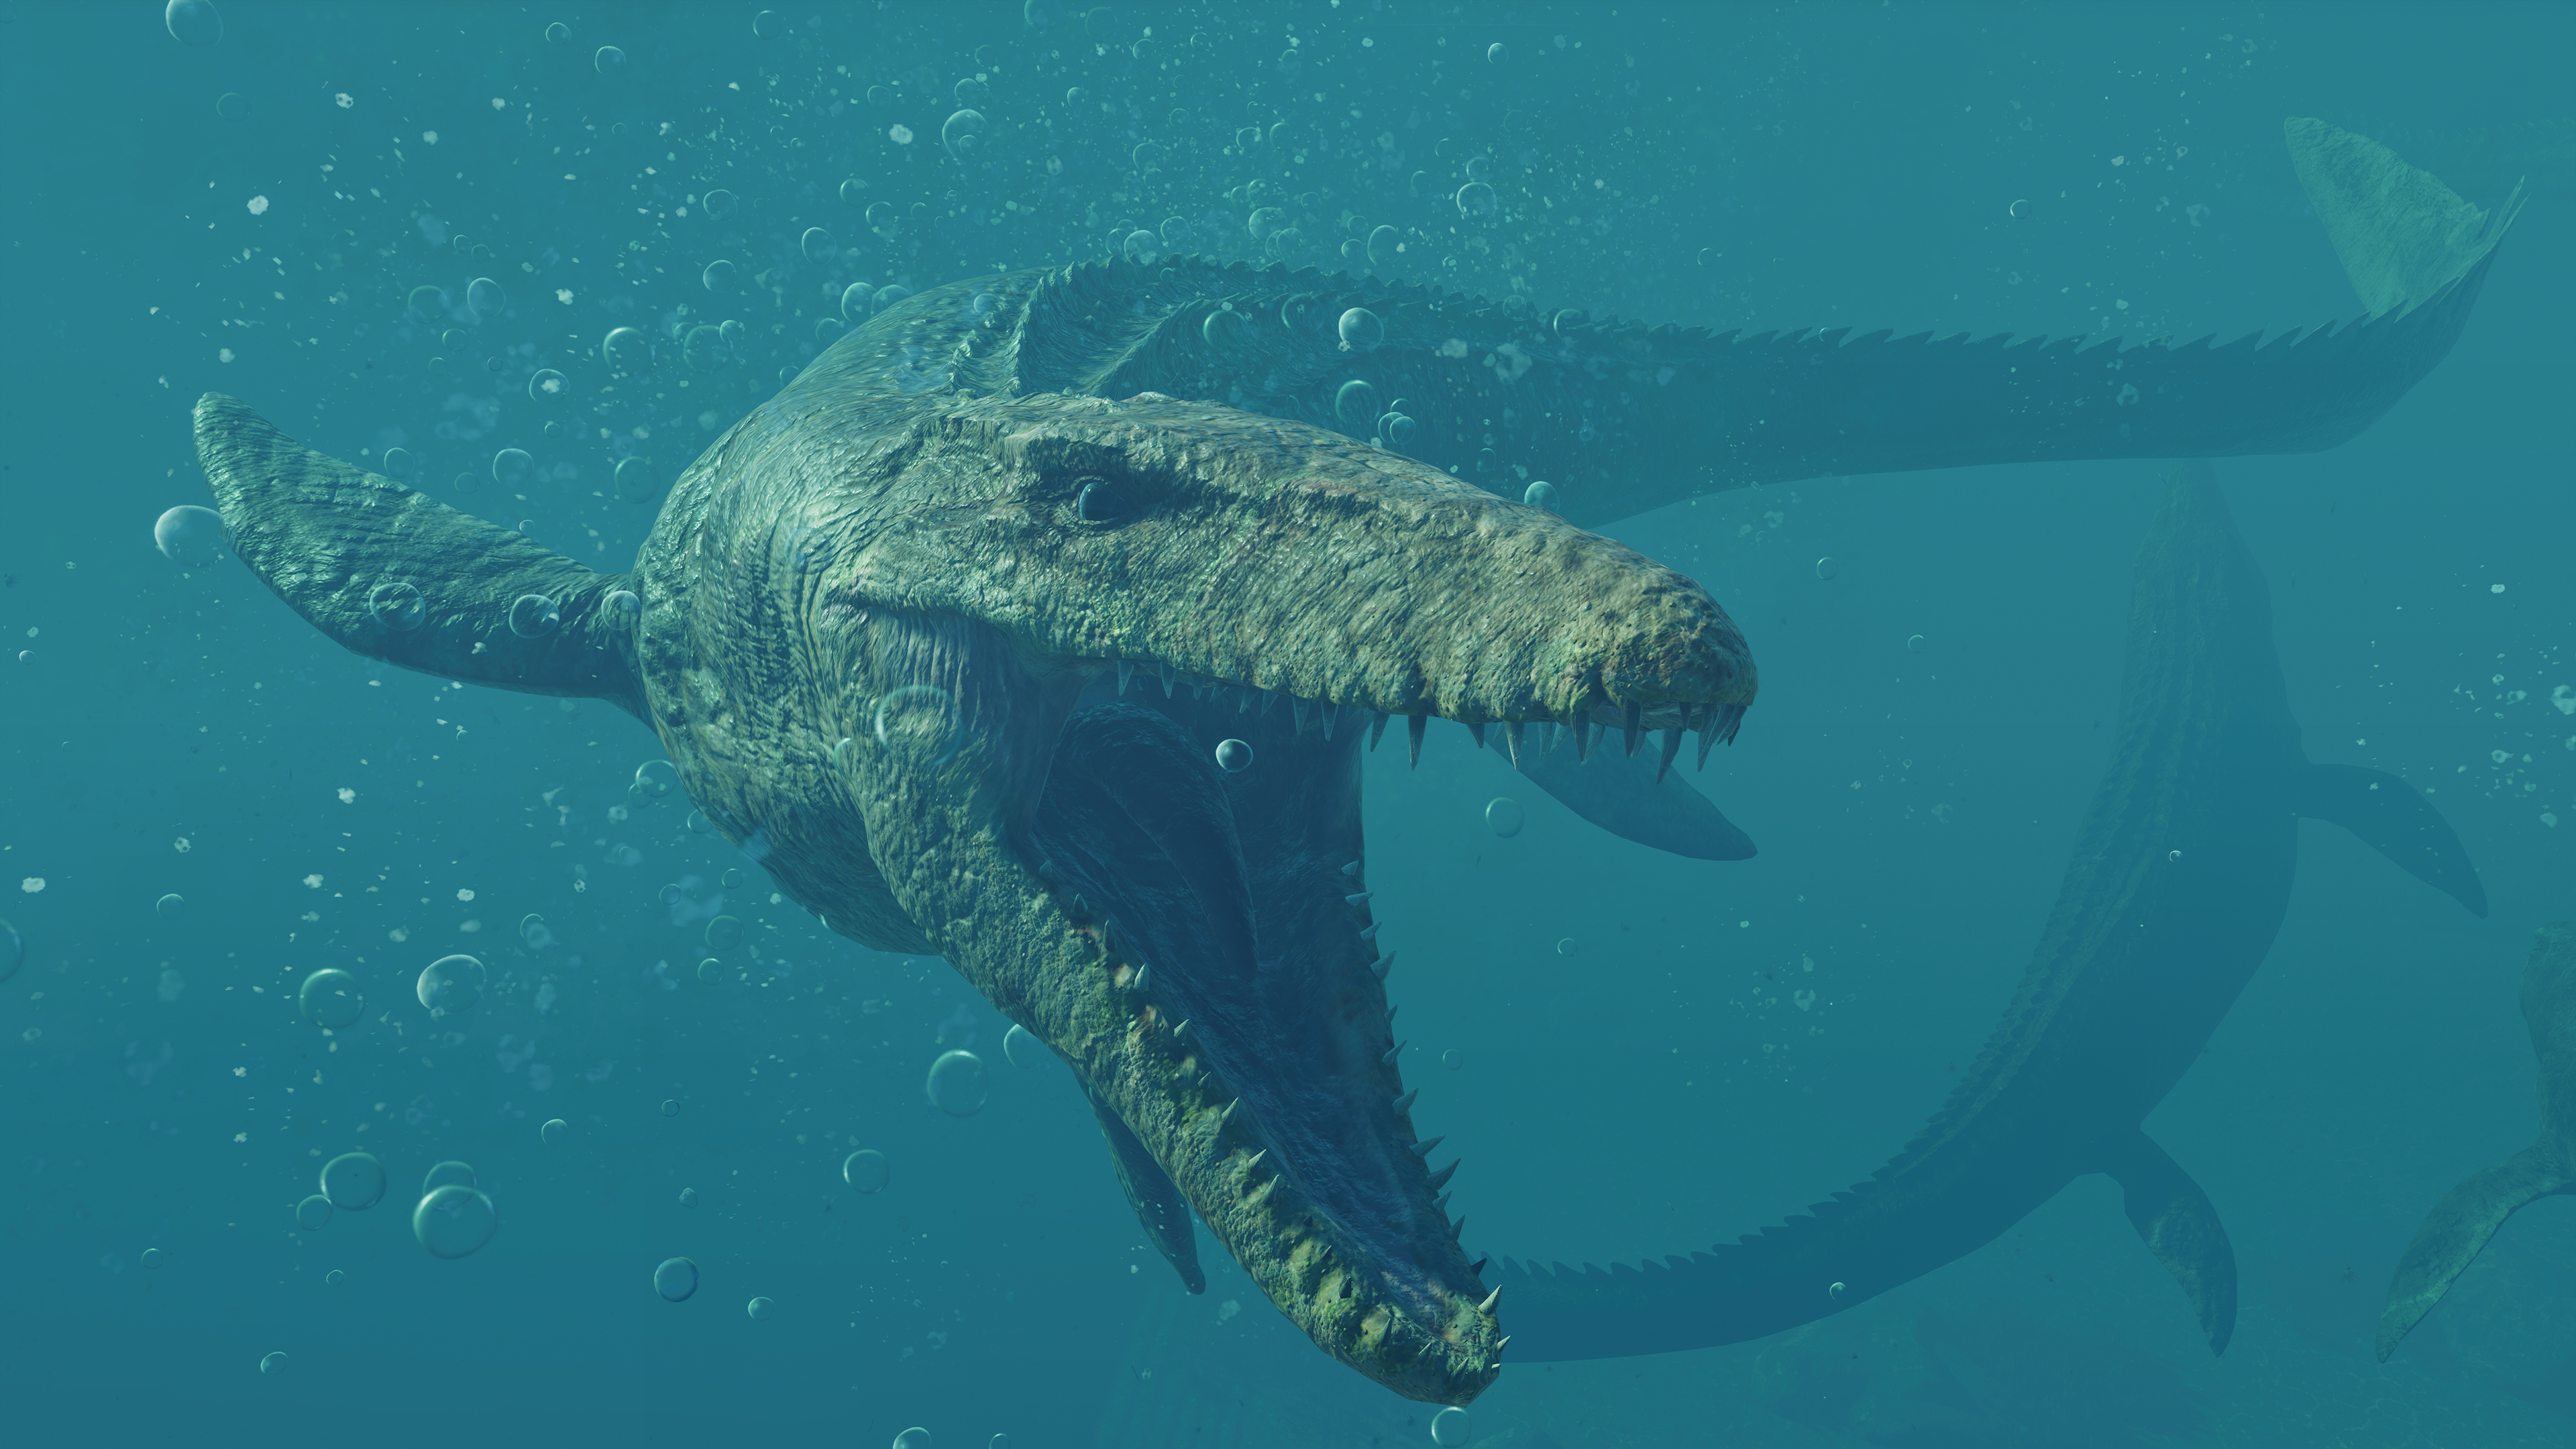 A giant underwater dinosaur called a mosasaurus swimming in water